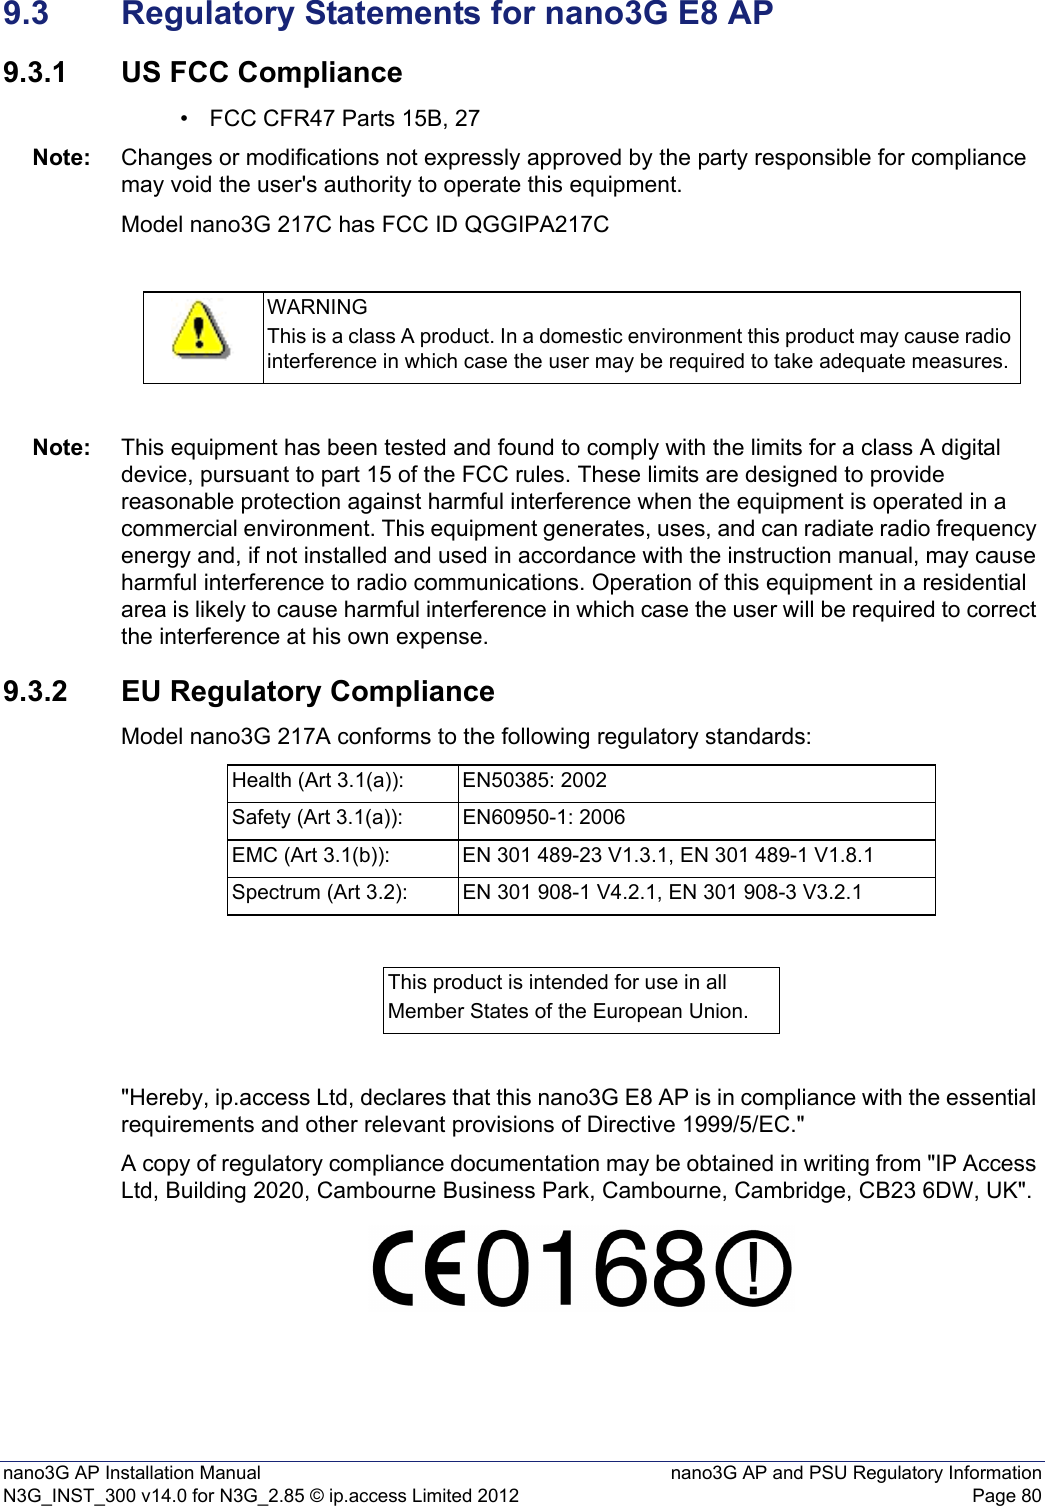 nano3G AP Installation Manual nano3G AP and PSU Regulatory InformationN3G_INST_300 v14.0 for N3G_2.85 © ip.access Limited 2012 Page 809.3 Regulatory Statements for nano3G E8 AP9.3.1 US FCC Compliance• FCC CFR47 Parts 15B, 27Note: Changes or modifications not expressly approved by the party responsible for compliance may void the user&apos;s authority to operate this equipment.Model nano3G 217C has FCC ID QGGIPA217CNote: This equipment has been tested and found to comply with the limits for a class A digital device, pursuant to part 15 of the FCC rules. These limits are designed to provide reasonable protection against harmful interference when the equipment is operated in a commercial environment. This equipment generates, uses, and can radiate radio frequency energy and, if not installed and used in accordance with the instruction manual, may cause harmful interference to radio communications. Operation of this equipment in a residential area is likely to cause harmful interference in which case the user will be required to correct the interference at his own expense.9.3.2 EU Regulatory ComplianceModel nano3G 217A conforms to the following regulatory standards:&quot;Hereby, ip.access Ltd, declares that this nano3G E8 AP is in compliance with the essential requirements and other relevant provisions of Directive 1999/5/EC.&quot;A copy of regulatory compliance documentation may be obtained in writing from &quot;IP Access Ltd, Building 2020, Cambourne Business Park, Cambourne, Cambridge, CB23 6DW, UK&quot;.WARNINGThis is a class A product. In a domestic environment this product may cause radio interference in which case the user may be required to take adequate measures.Health (Art 3.1(a)): EN50385: 2002Safety (Art 3.1(a)): EN60950-1: 2006EMC (Art 3.1(b)): EN 301 489-23 V1.3.1, EN 301 489-1 V1.8.1Spectrum (Art 3.2): EN 301 908-1 V4.2.1, EN 301 908-3 V3.2.1This product is intended for use in allMember States of the European Union.